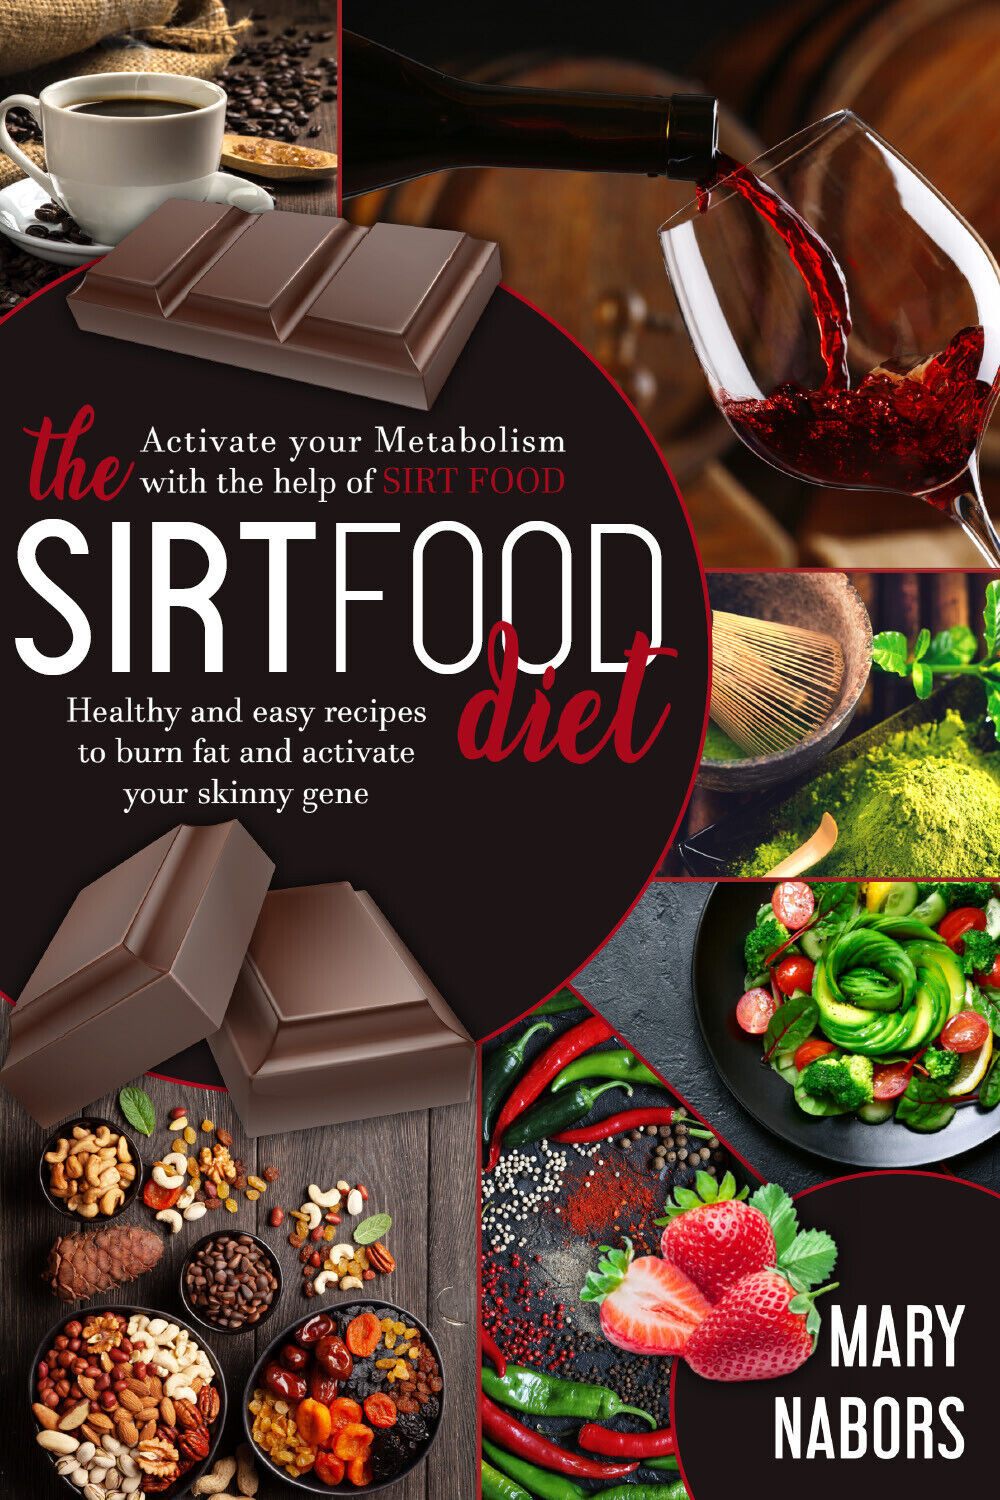 THE SIRTFOOD DIET di Mary Nabors,  2021,  Youcanprint libro usato